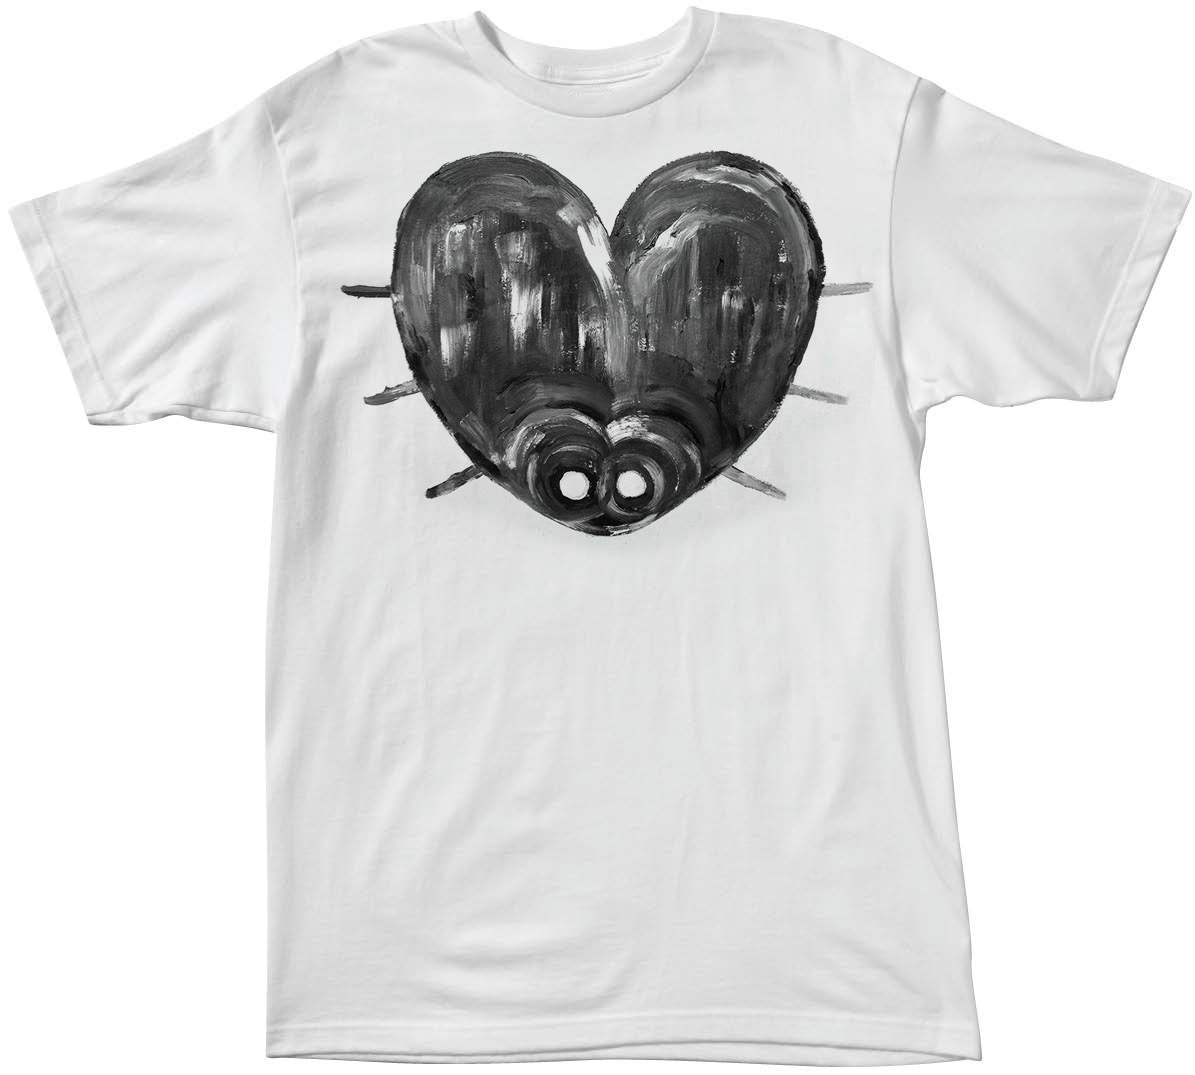 flea heart bug t-shirt limited Tee graphics superexpresso paint Digital Collage